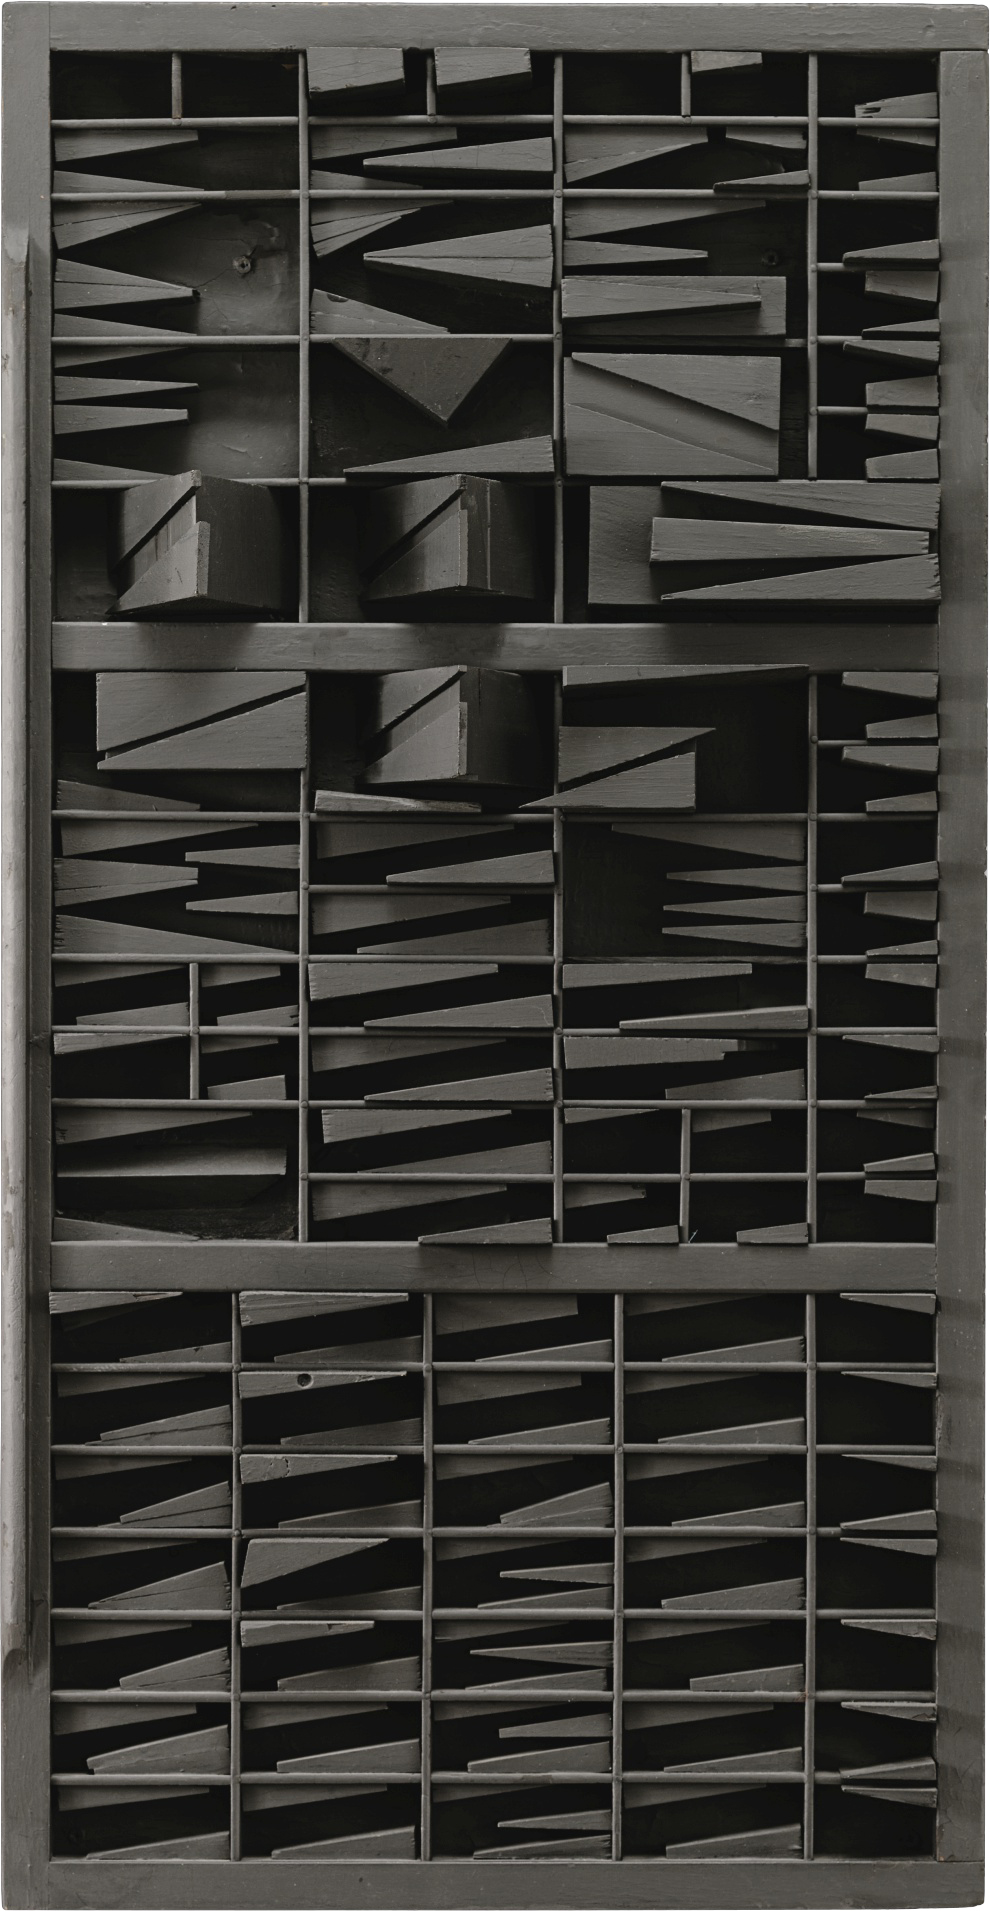 Louise Nevelson - End of Day XXI, 1972